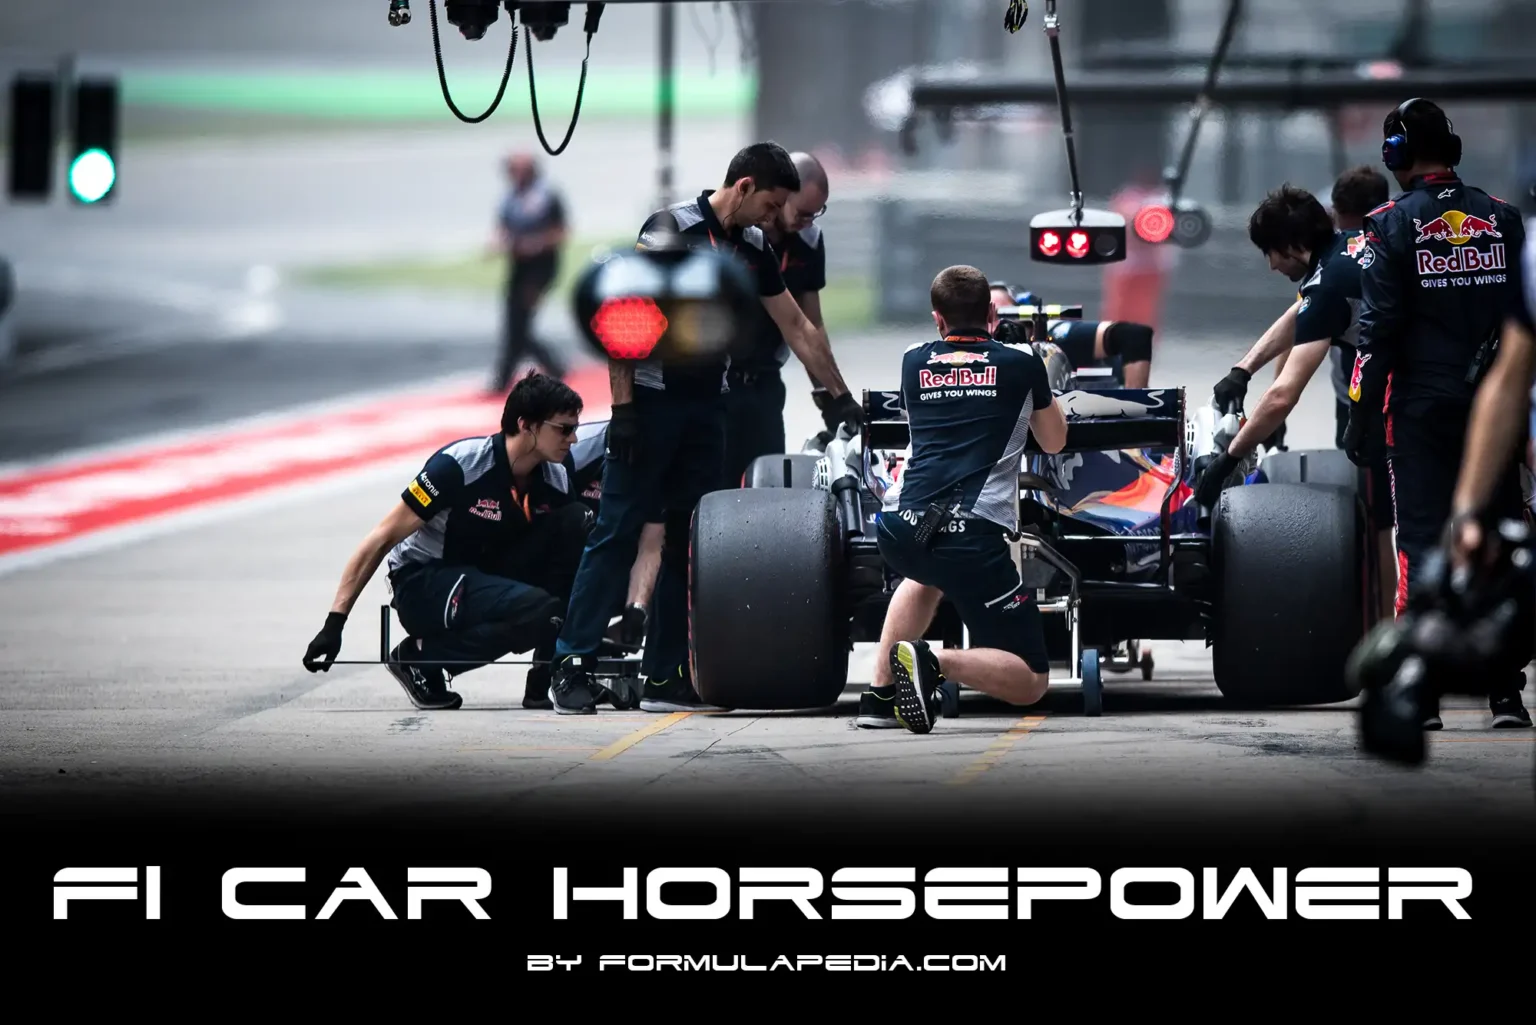 How much horspower in a Formula 1 car?